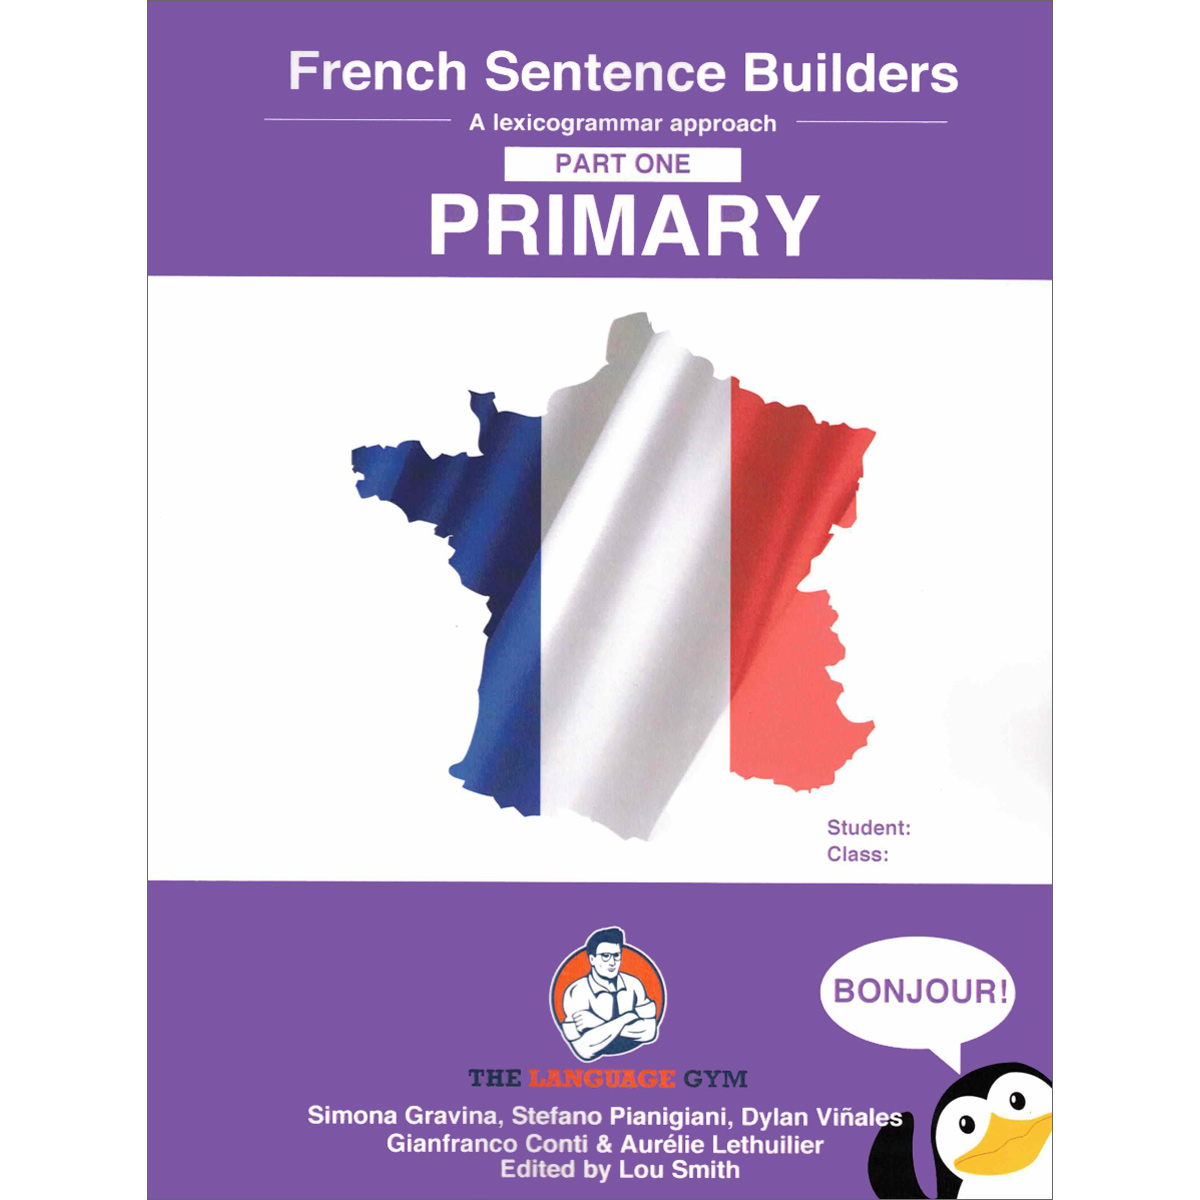 French Sentence Builders - Primary (Part One)